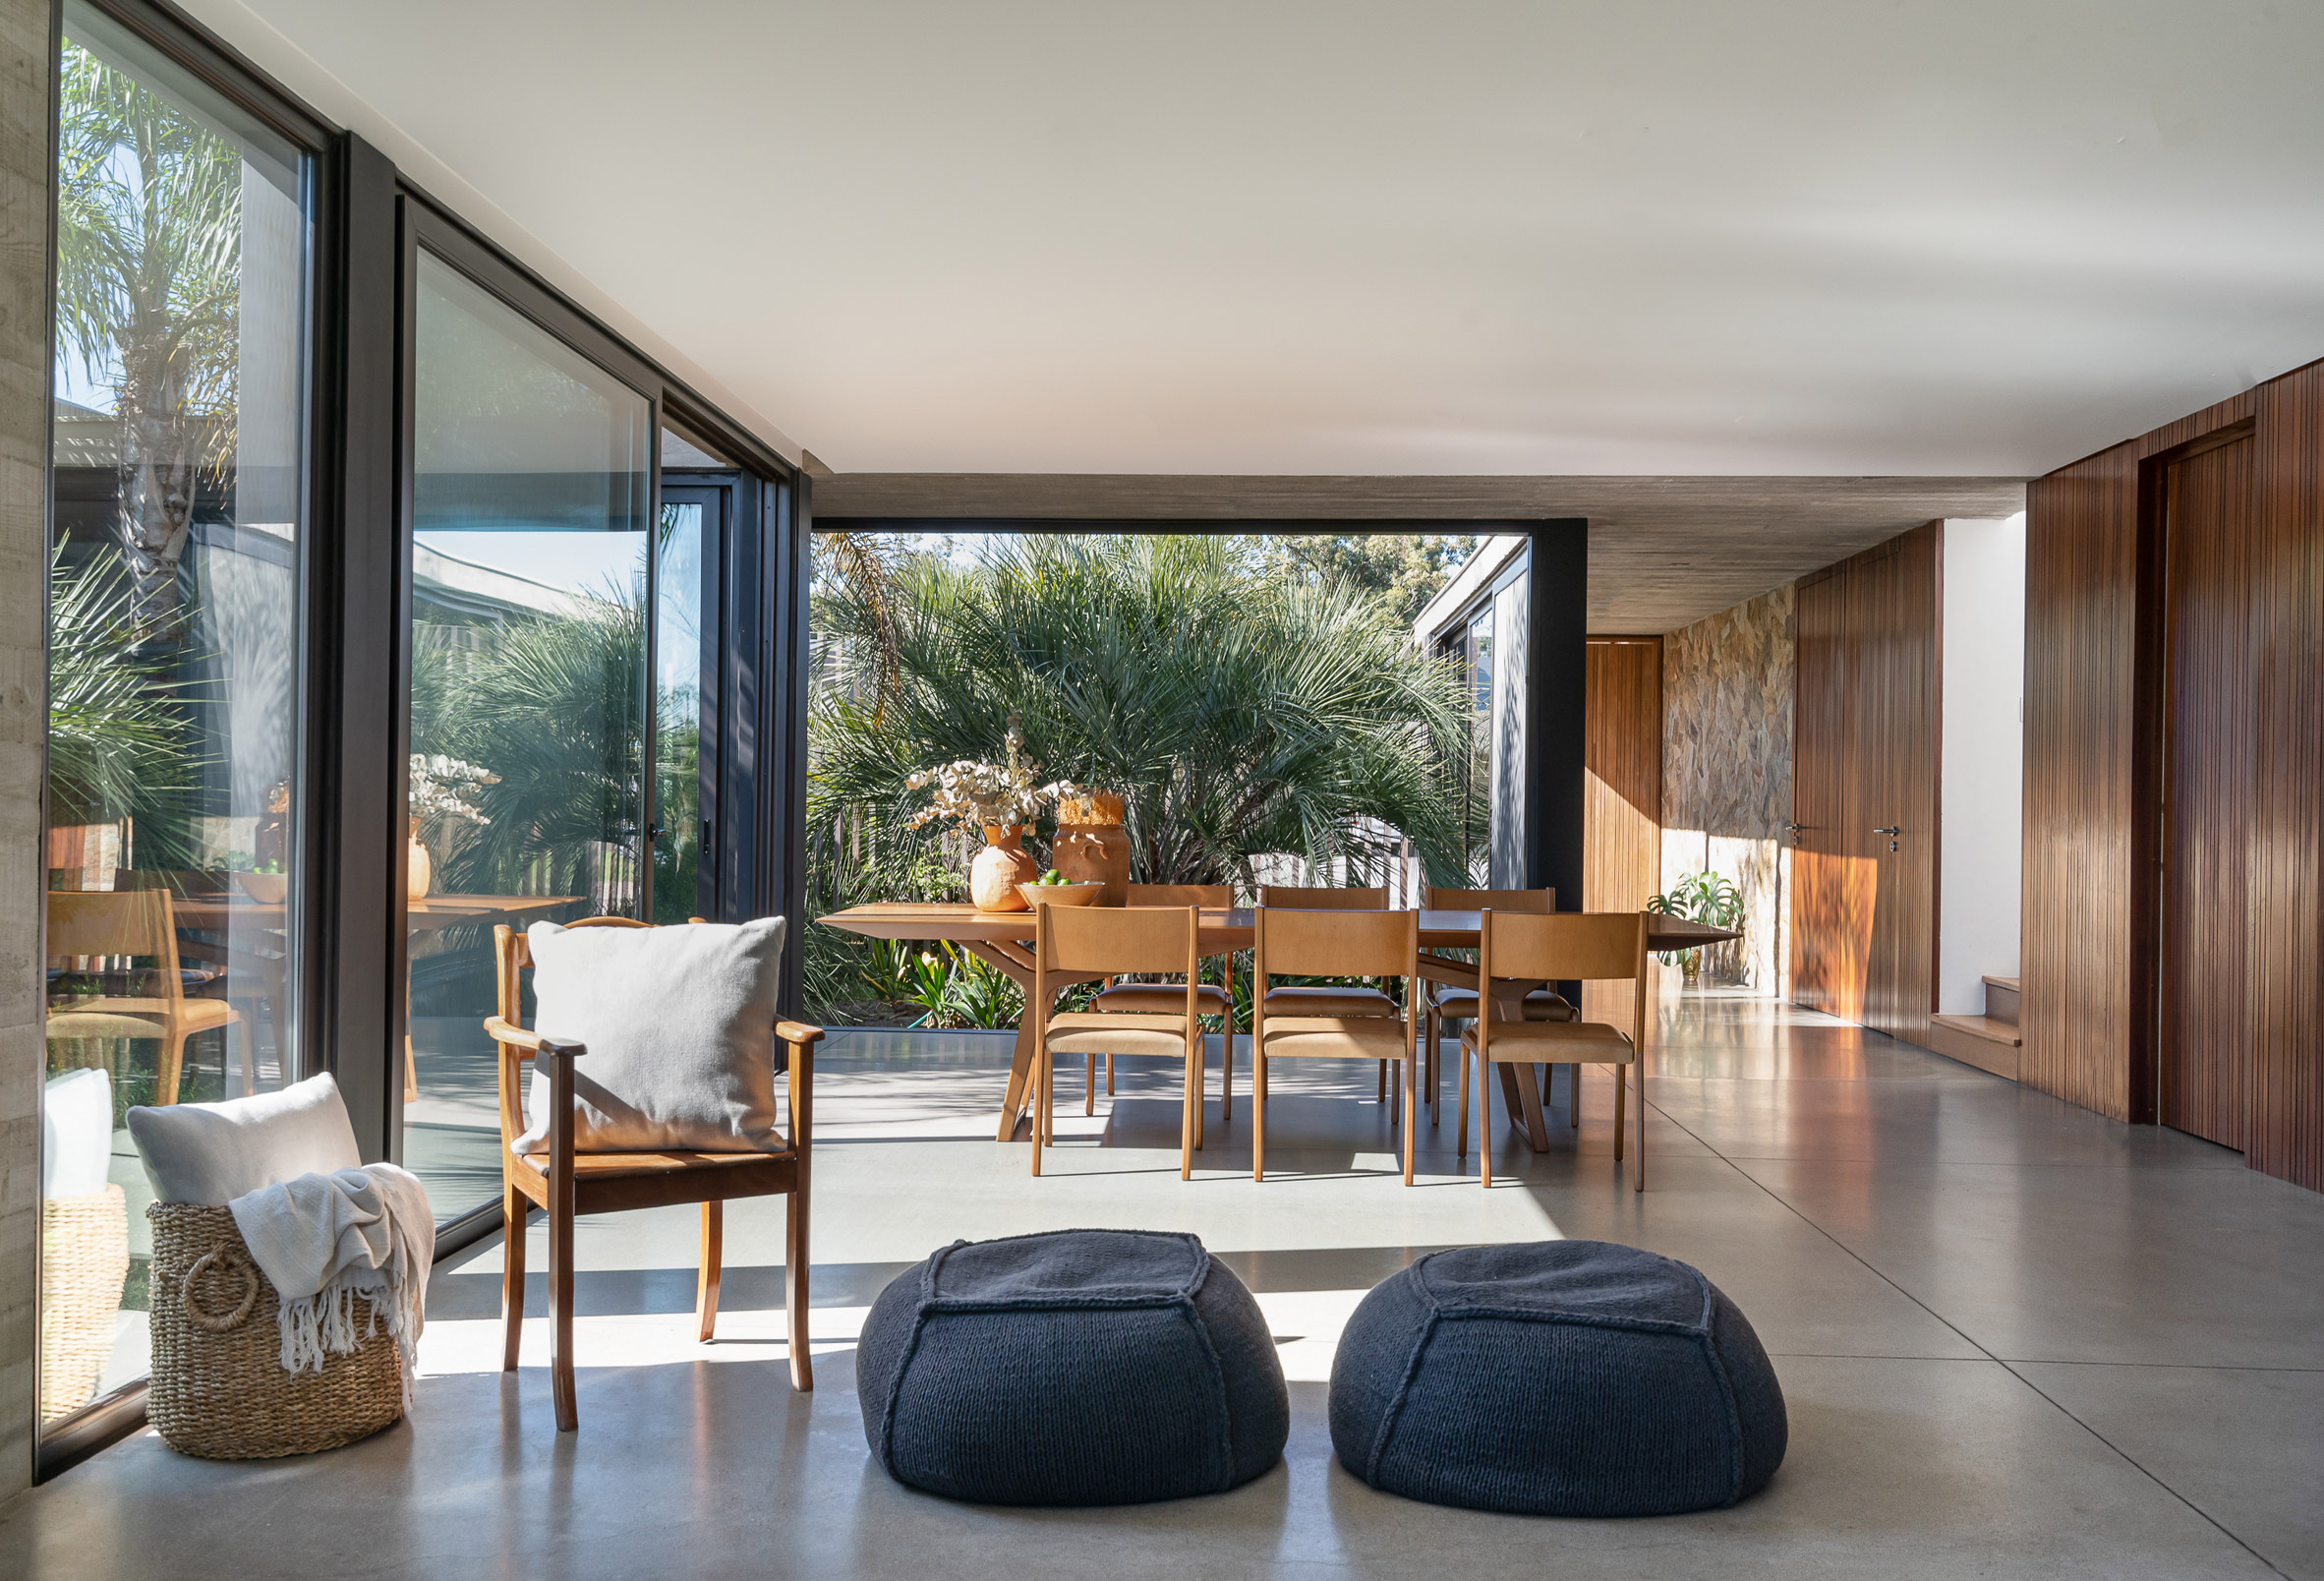 Modern Residence in Brazil Features Stones, Wood, Glass and Metal